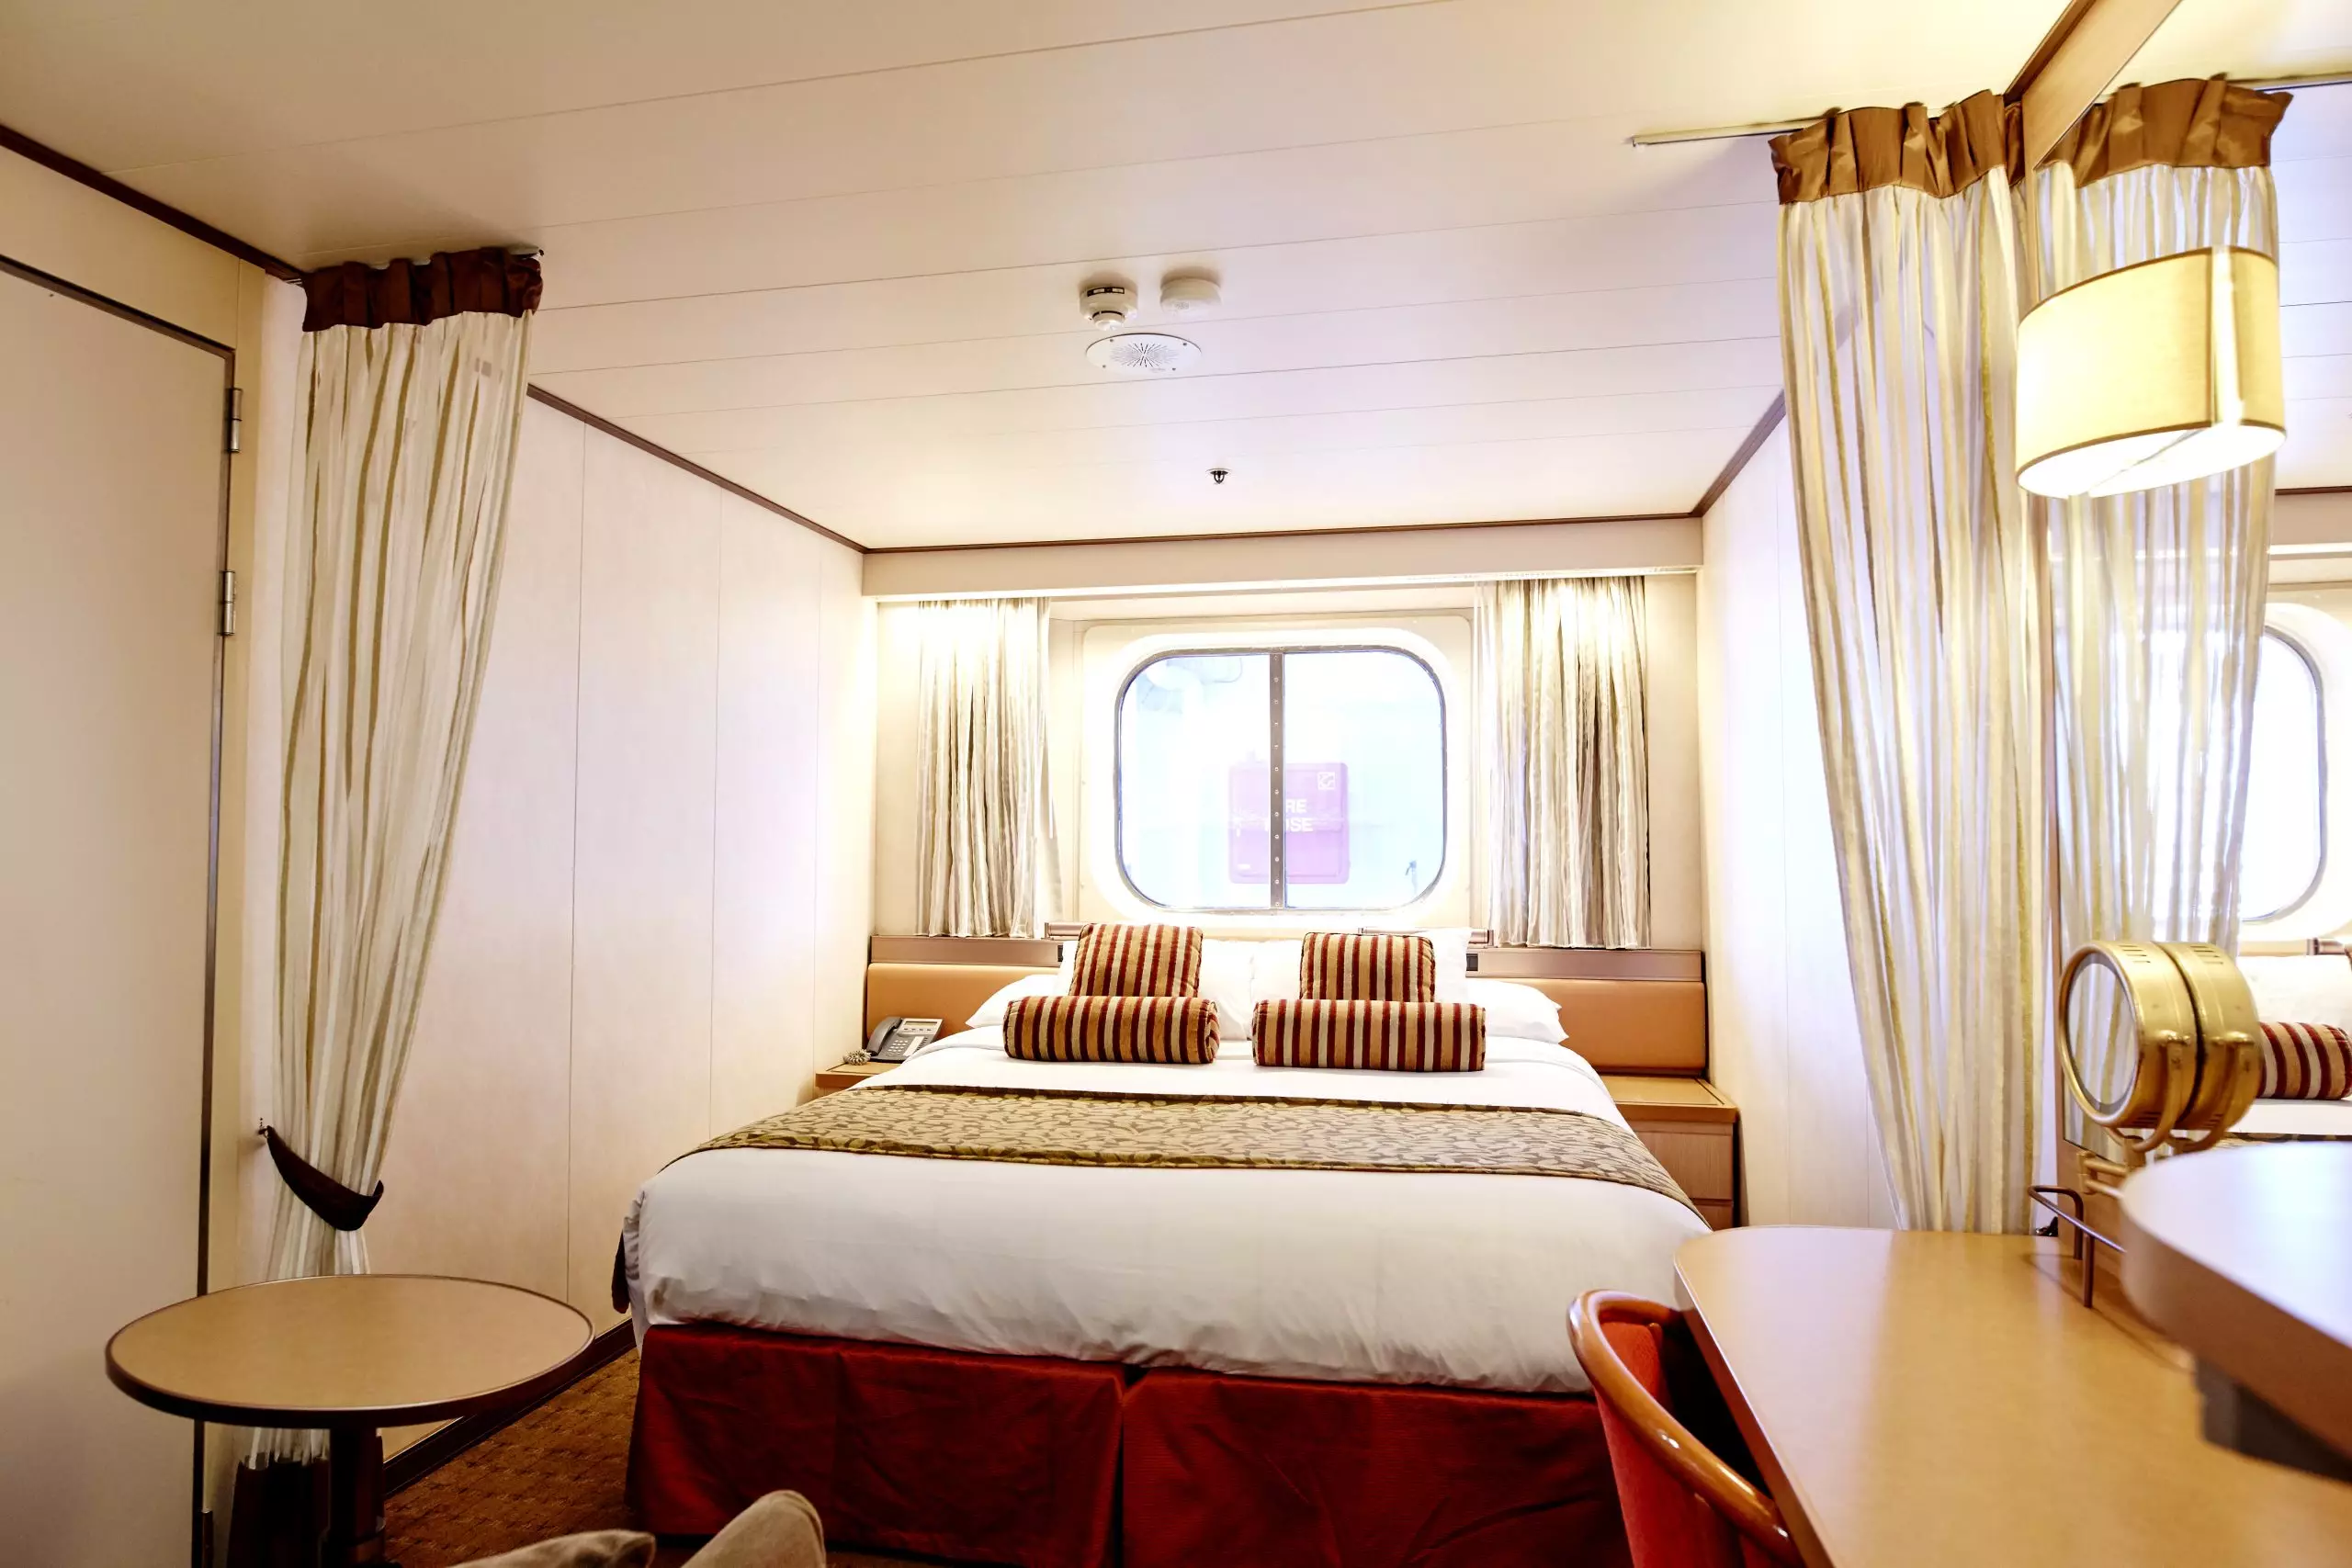 Journey_Ship_XBO obstructed view Deck 6 (double bed)